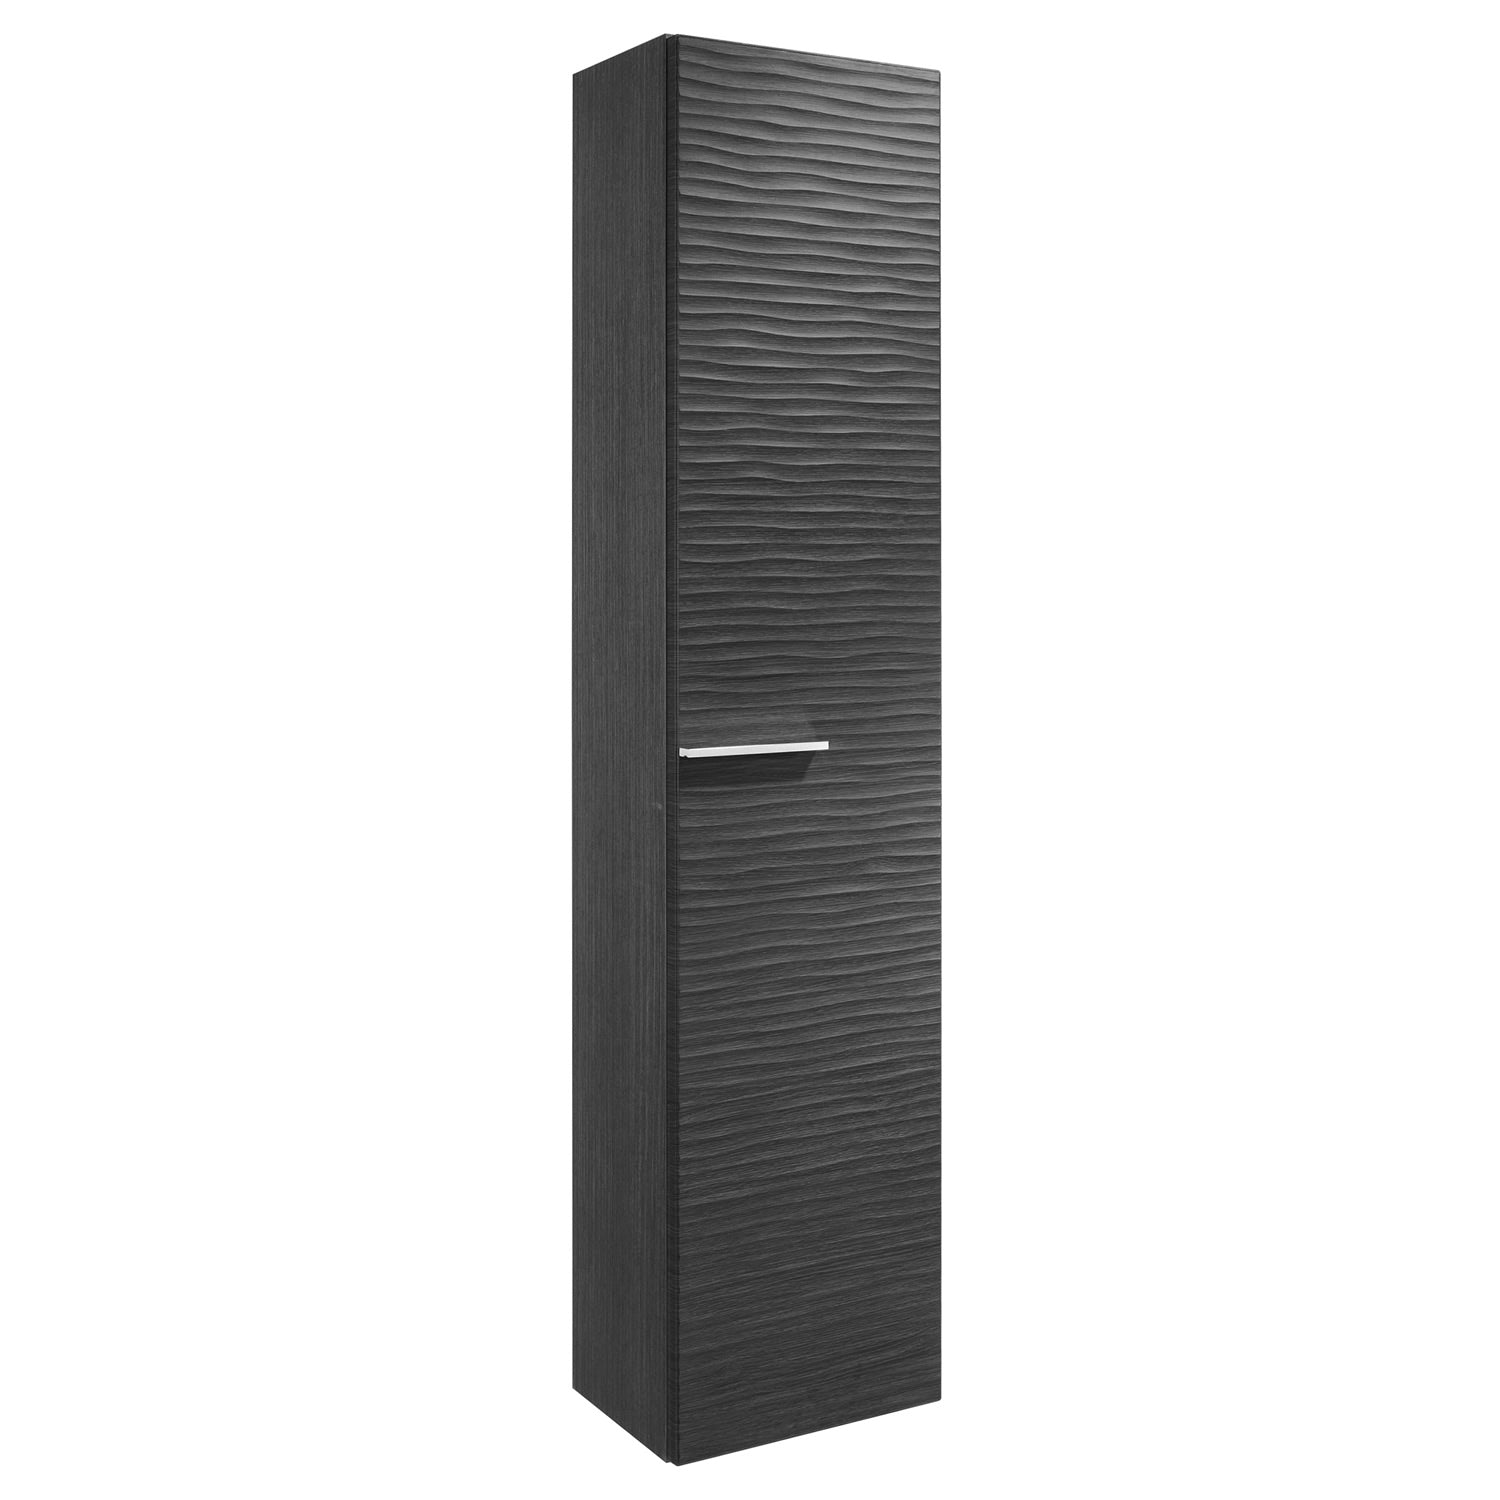 16" Tall Side Cabinet, Wall Mount, 1 Door whit Handle and Soft Close and Reversible Opening, Serie Dune by VALENZUELA